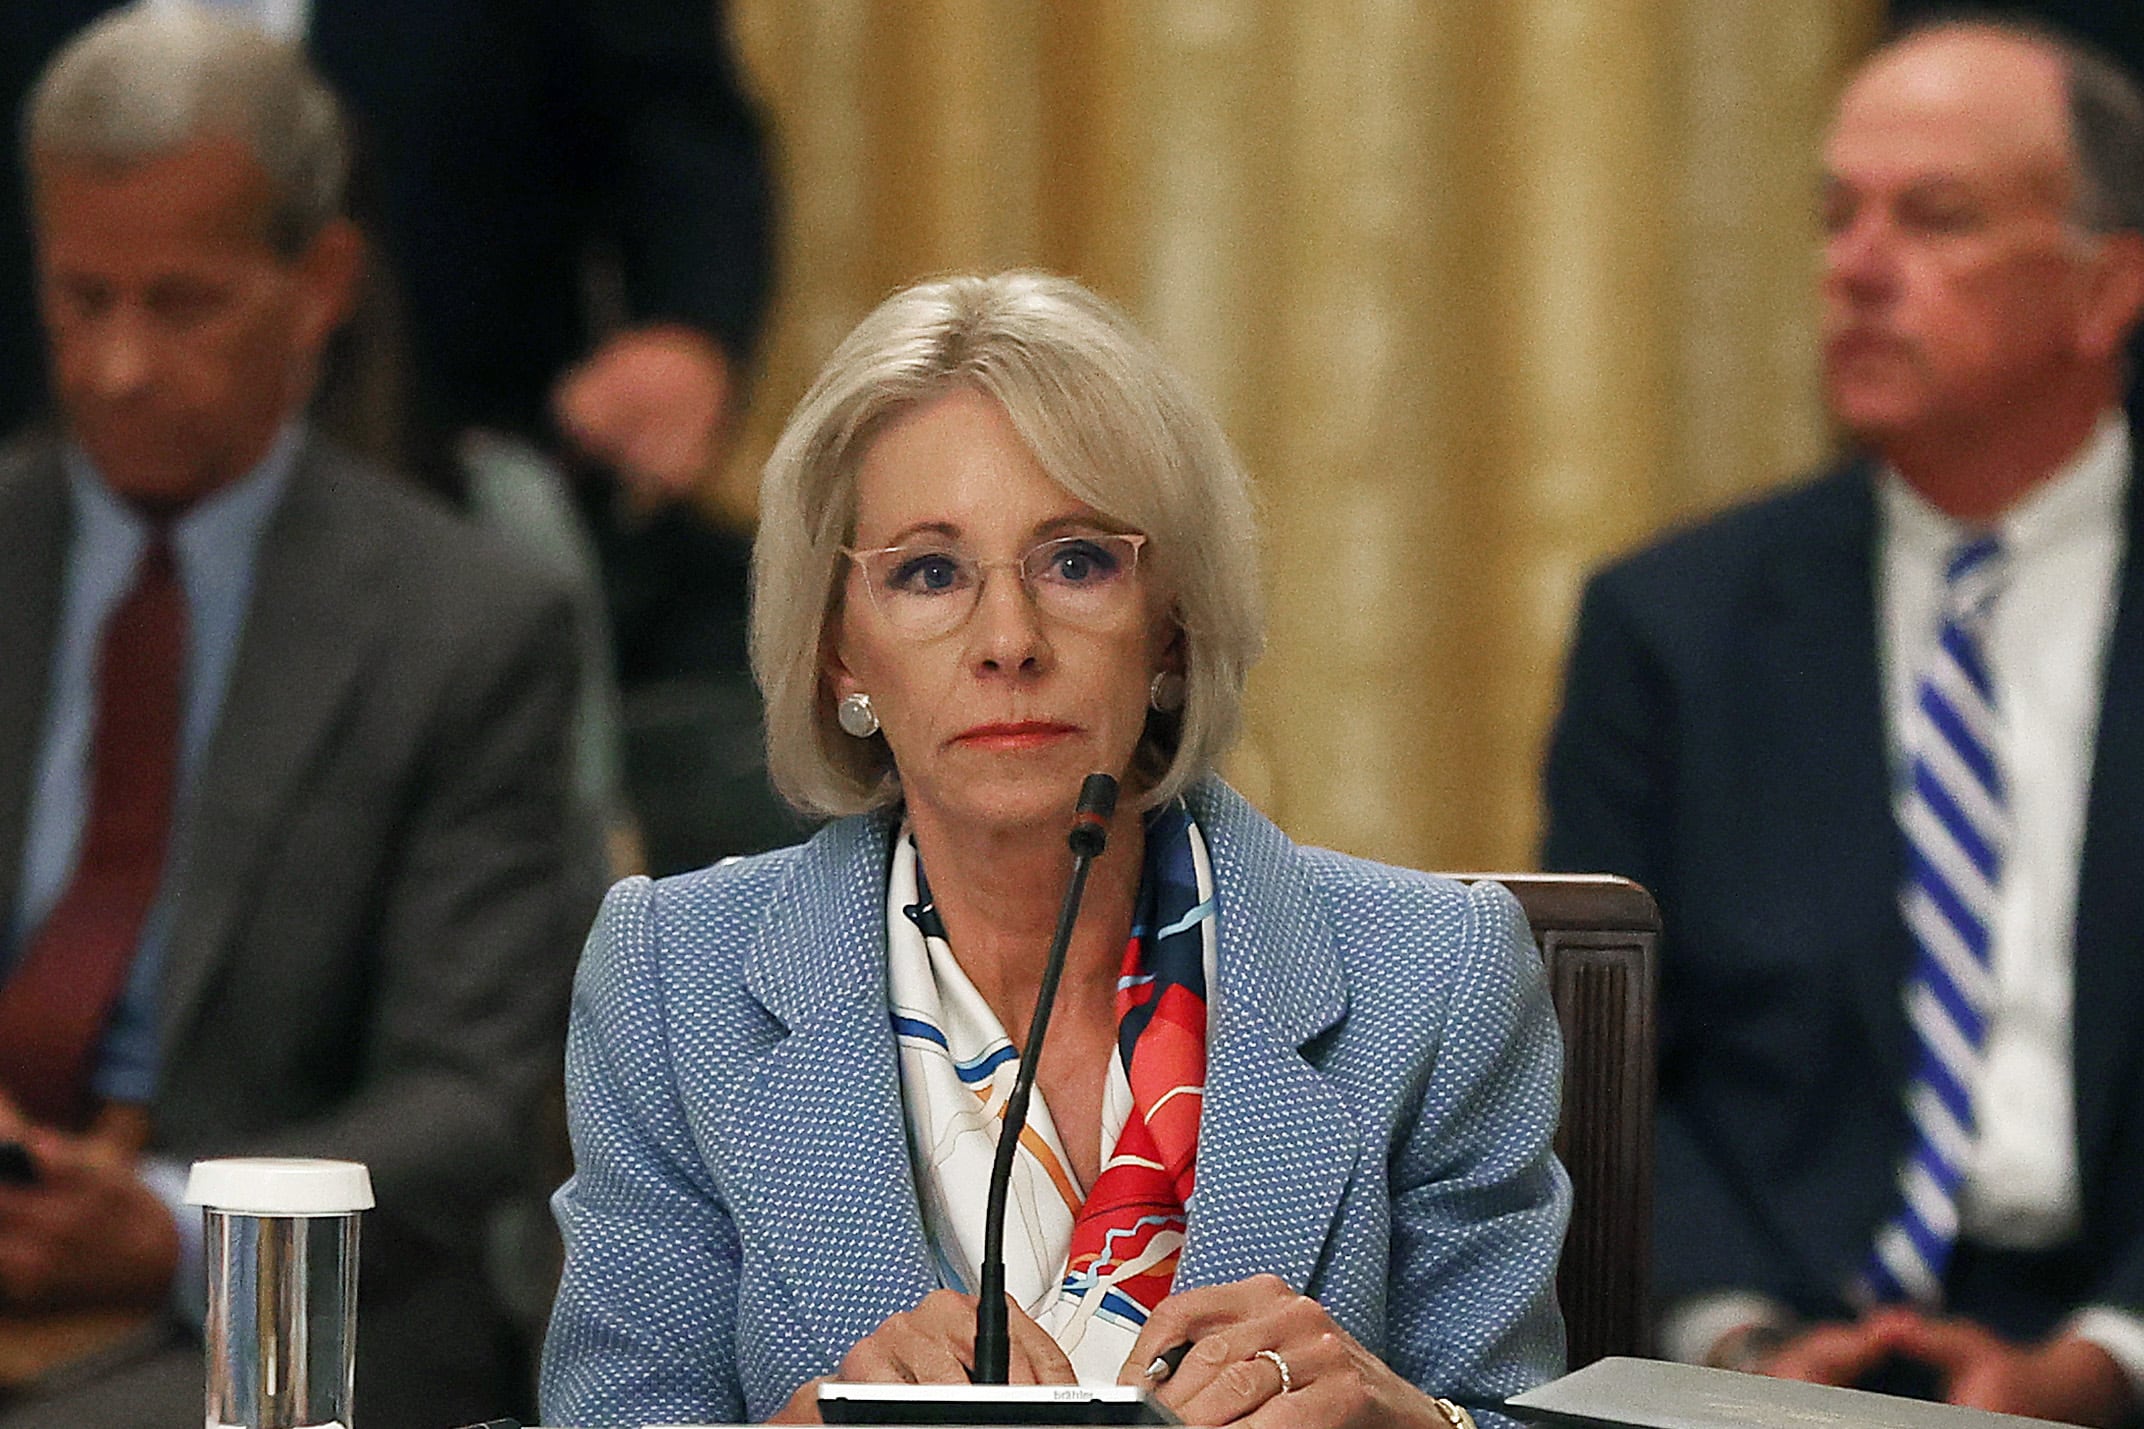 Betsy DeVos wearing a blazer and glasses sits at a table before a microphone